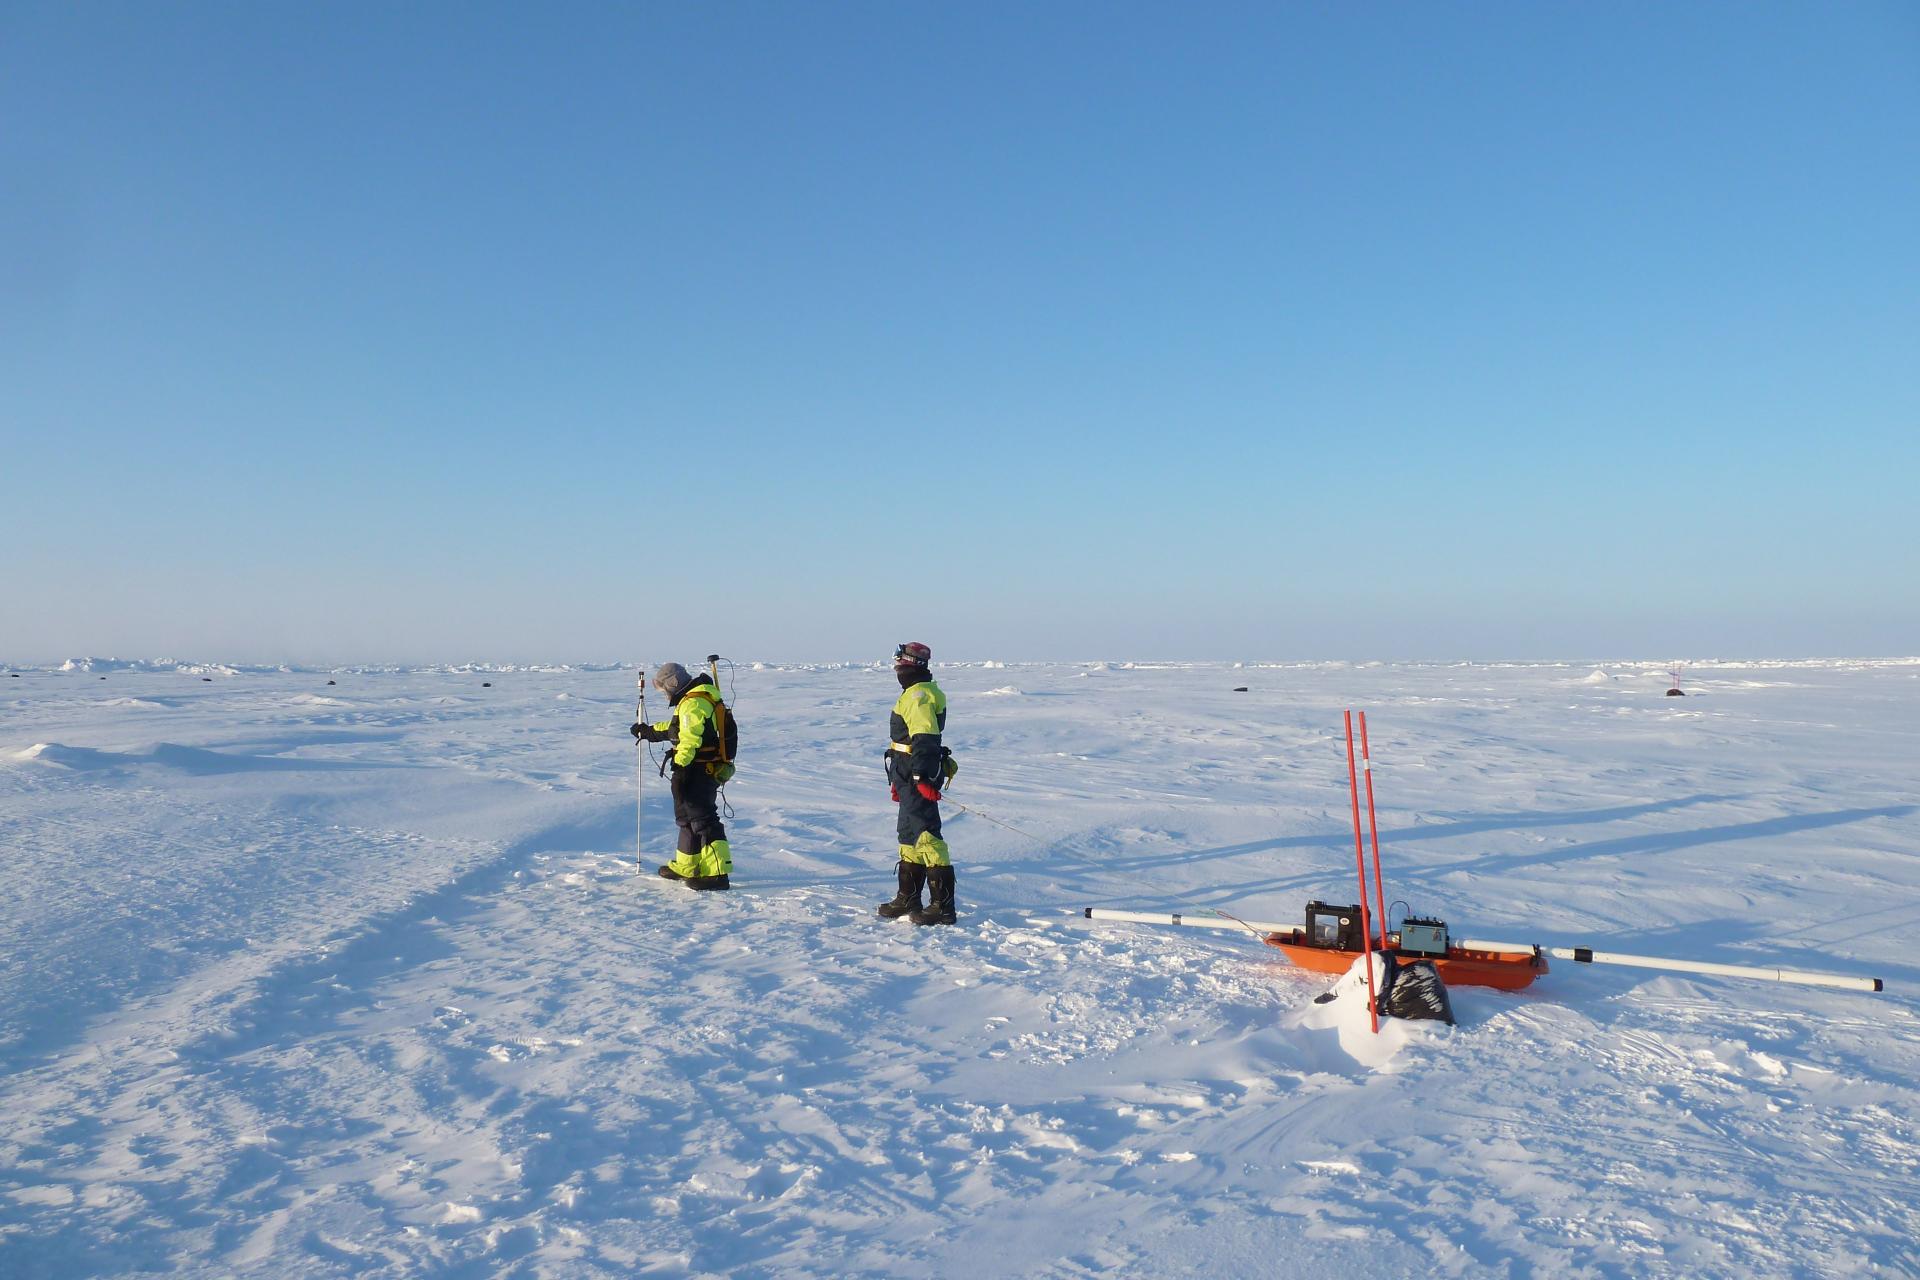 Field scientists measure snow and ice thickness along a survey line in preparation for IceBridge's overflight.